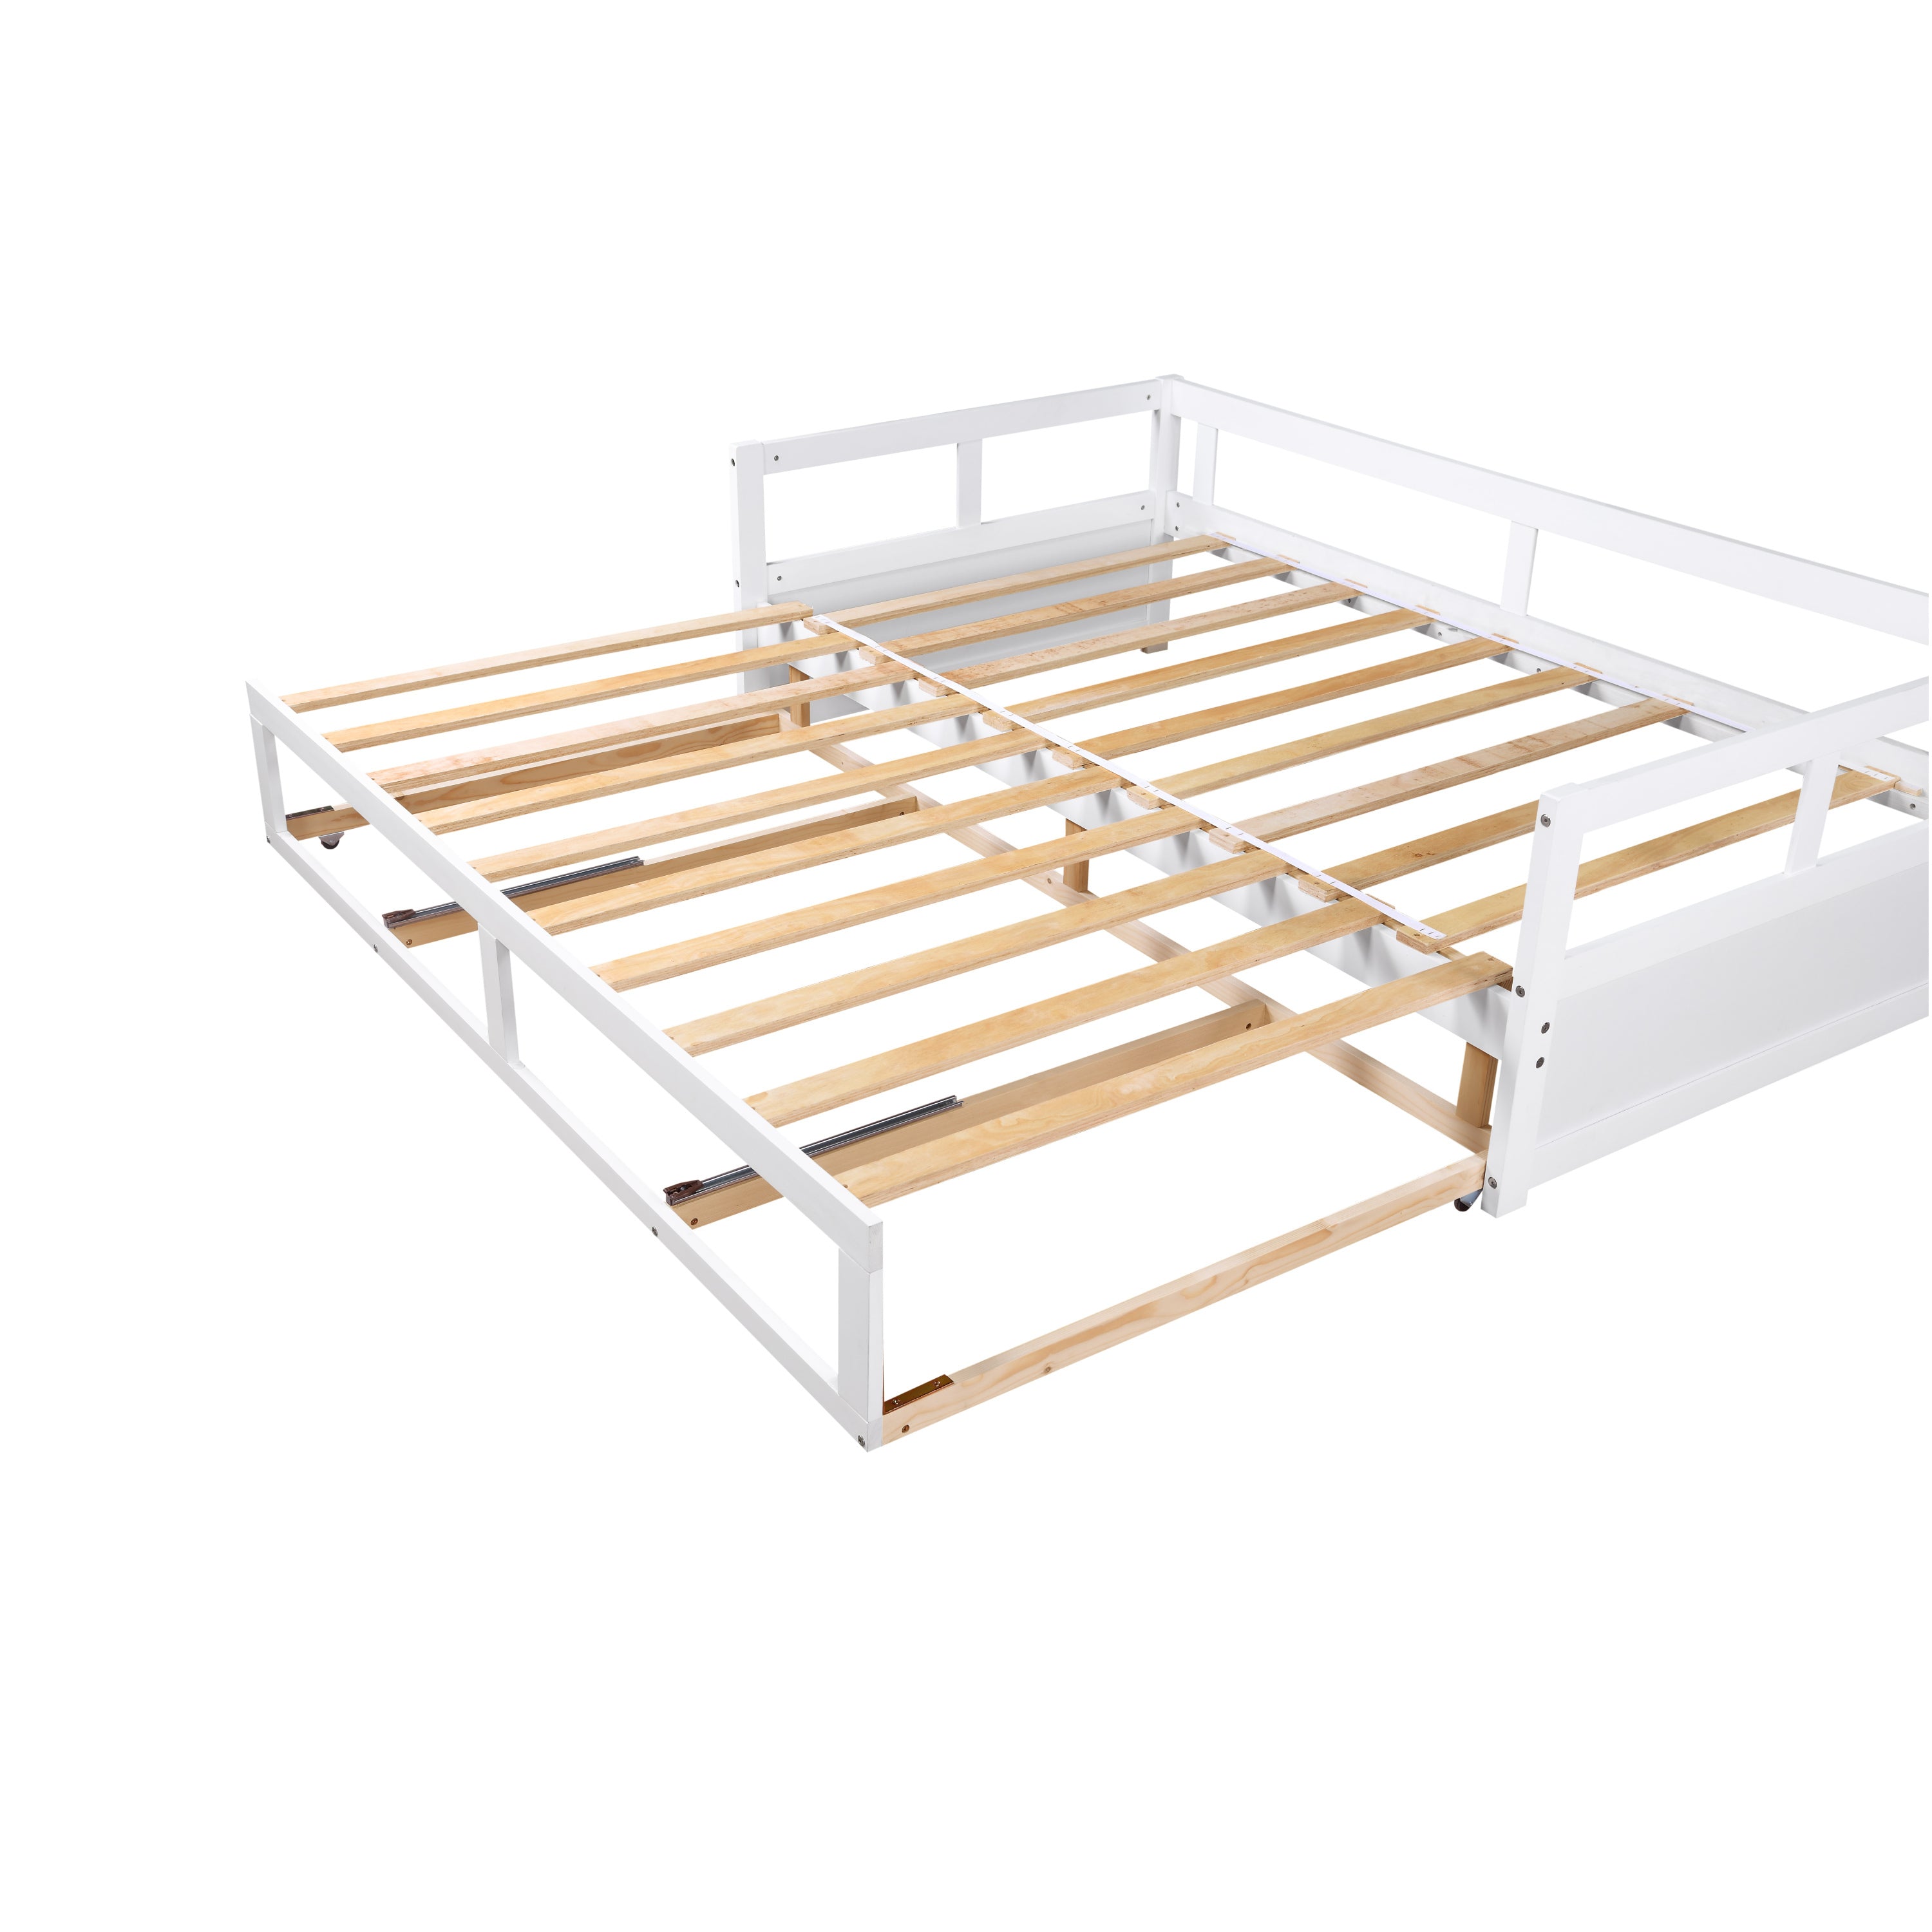 Extendable  Daybed with Trundle Bed and Two Storage Drawers - White